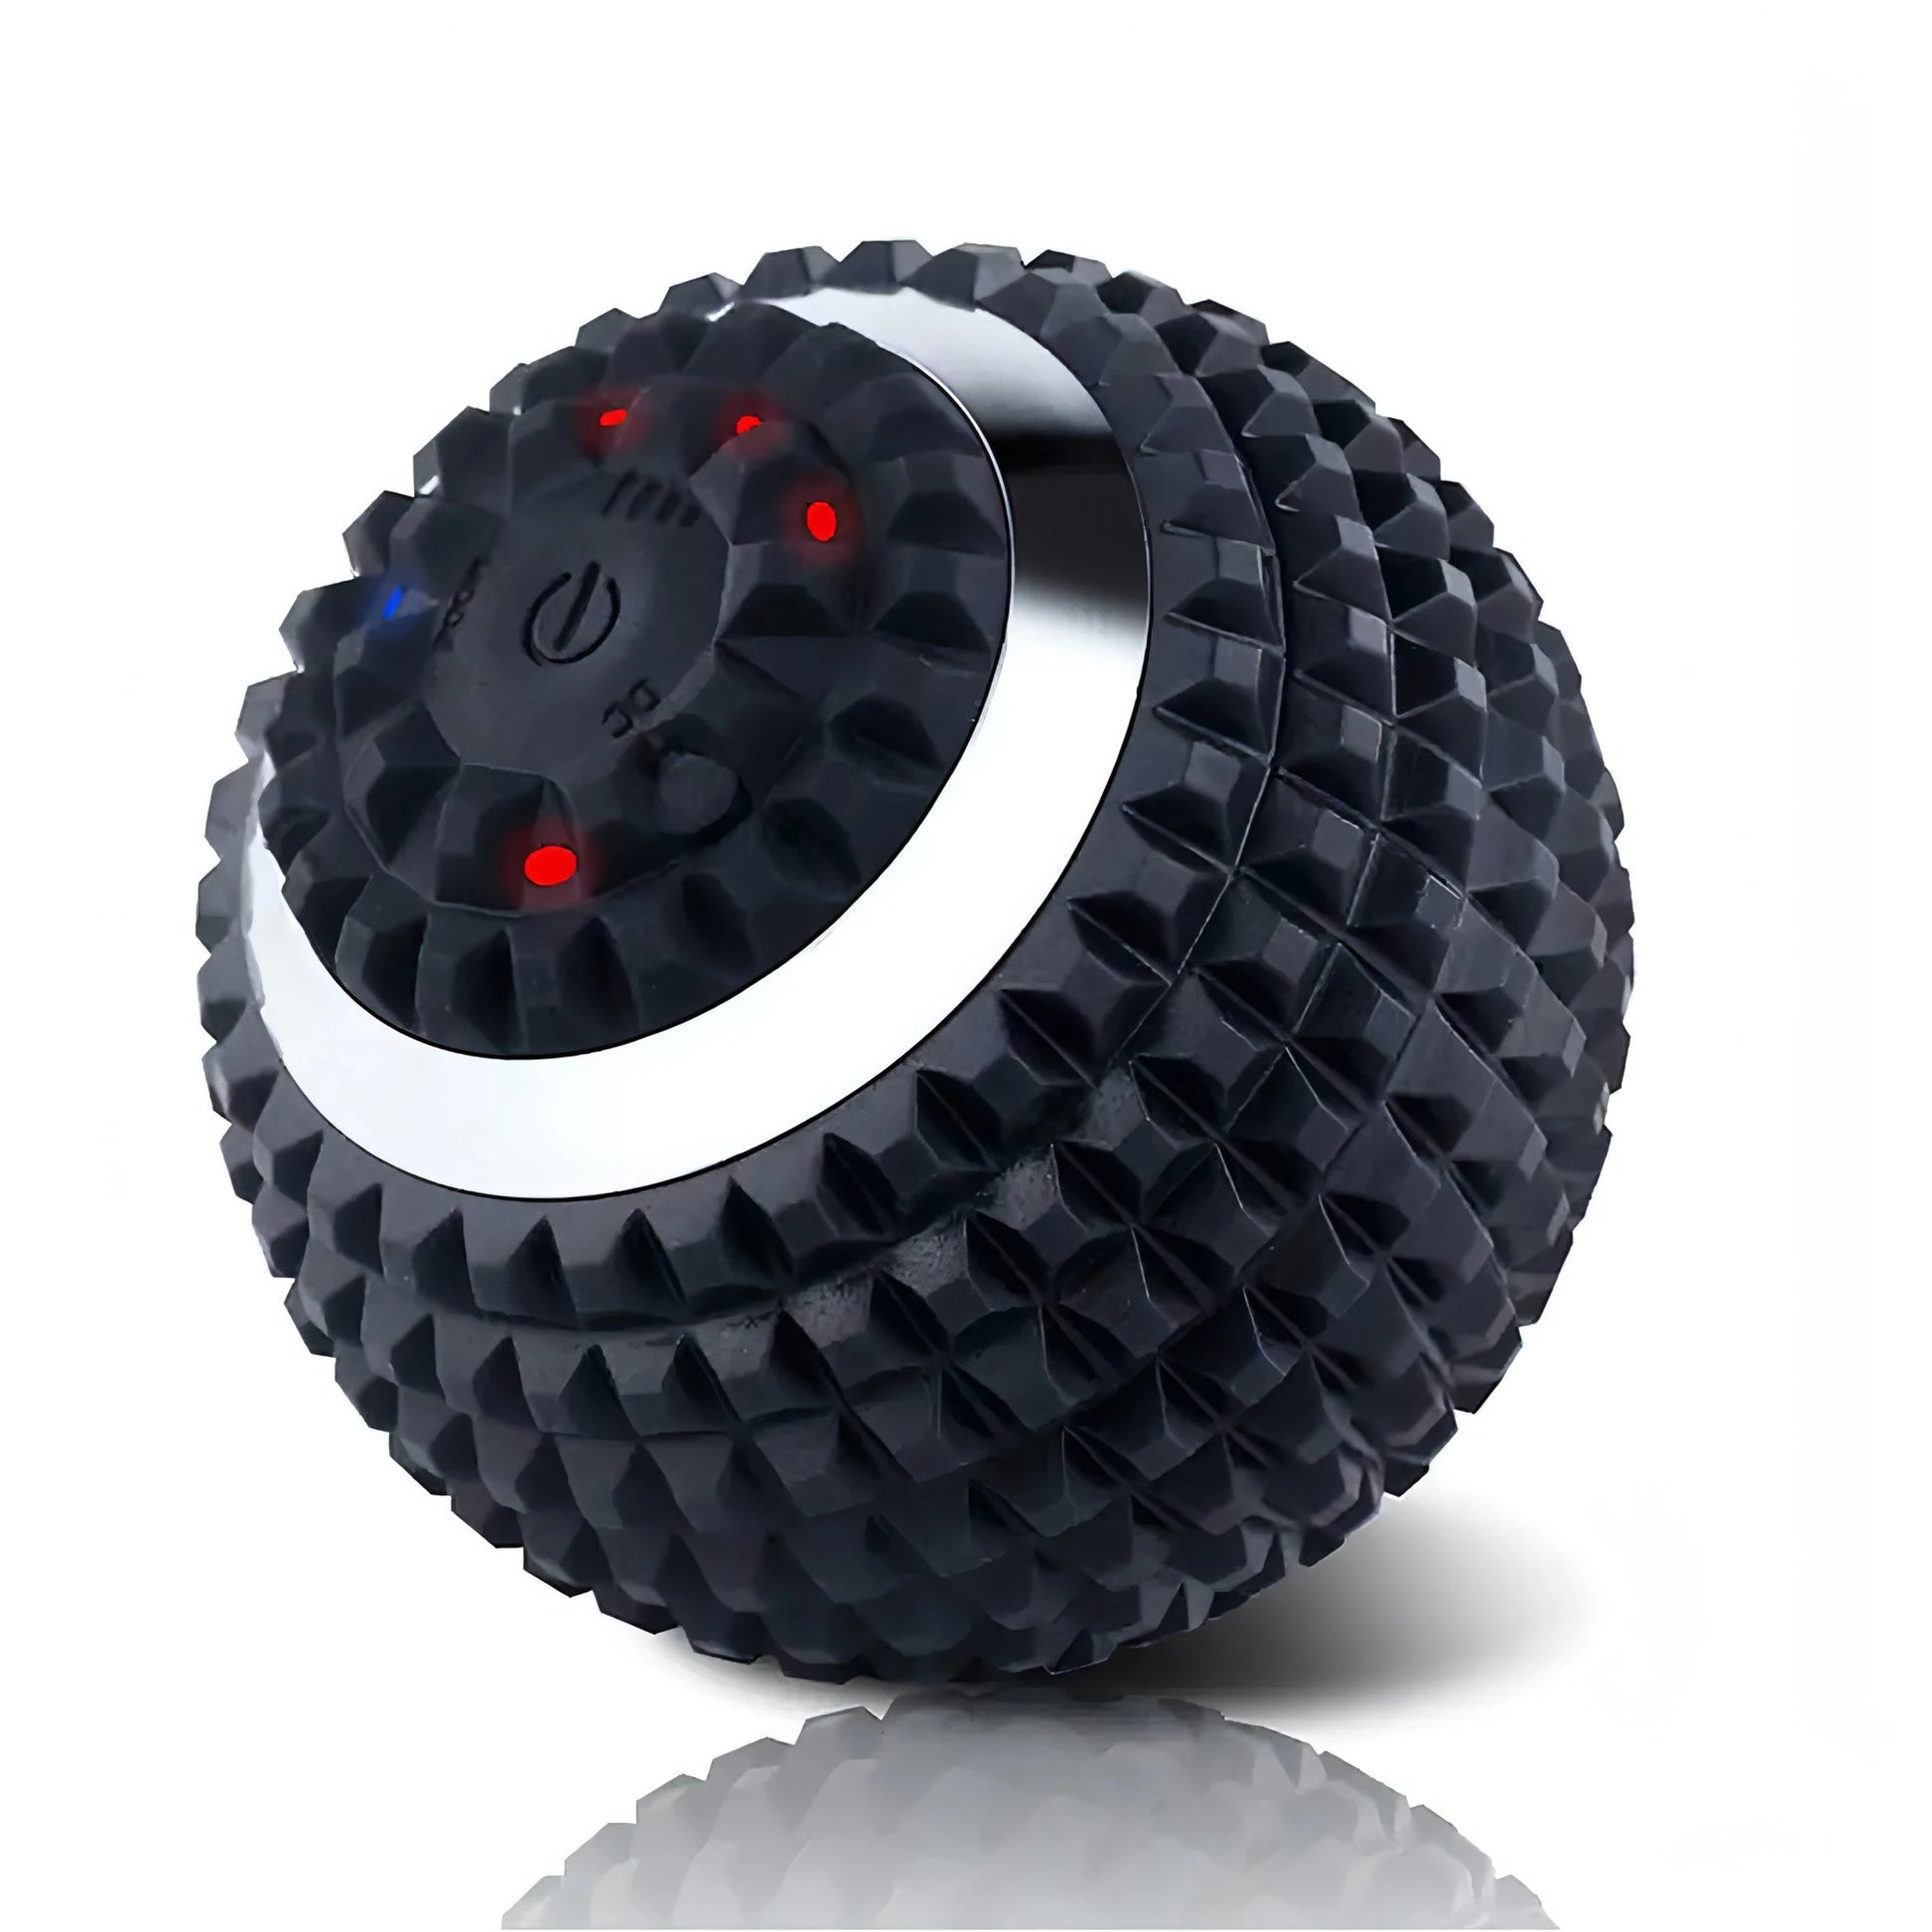 Electric Massage Ball - Allure SocietyMuscular Support